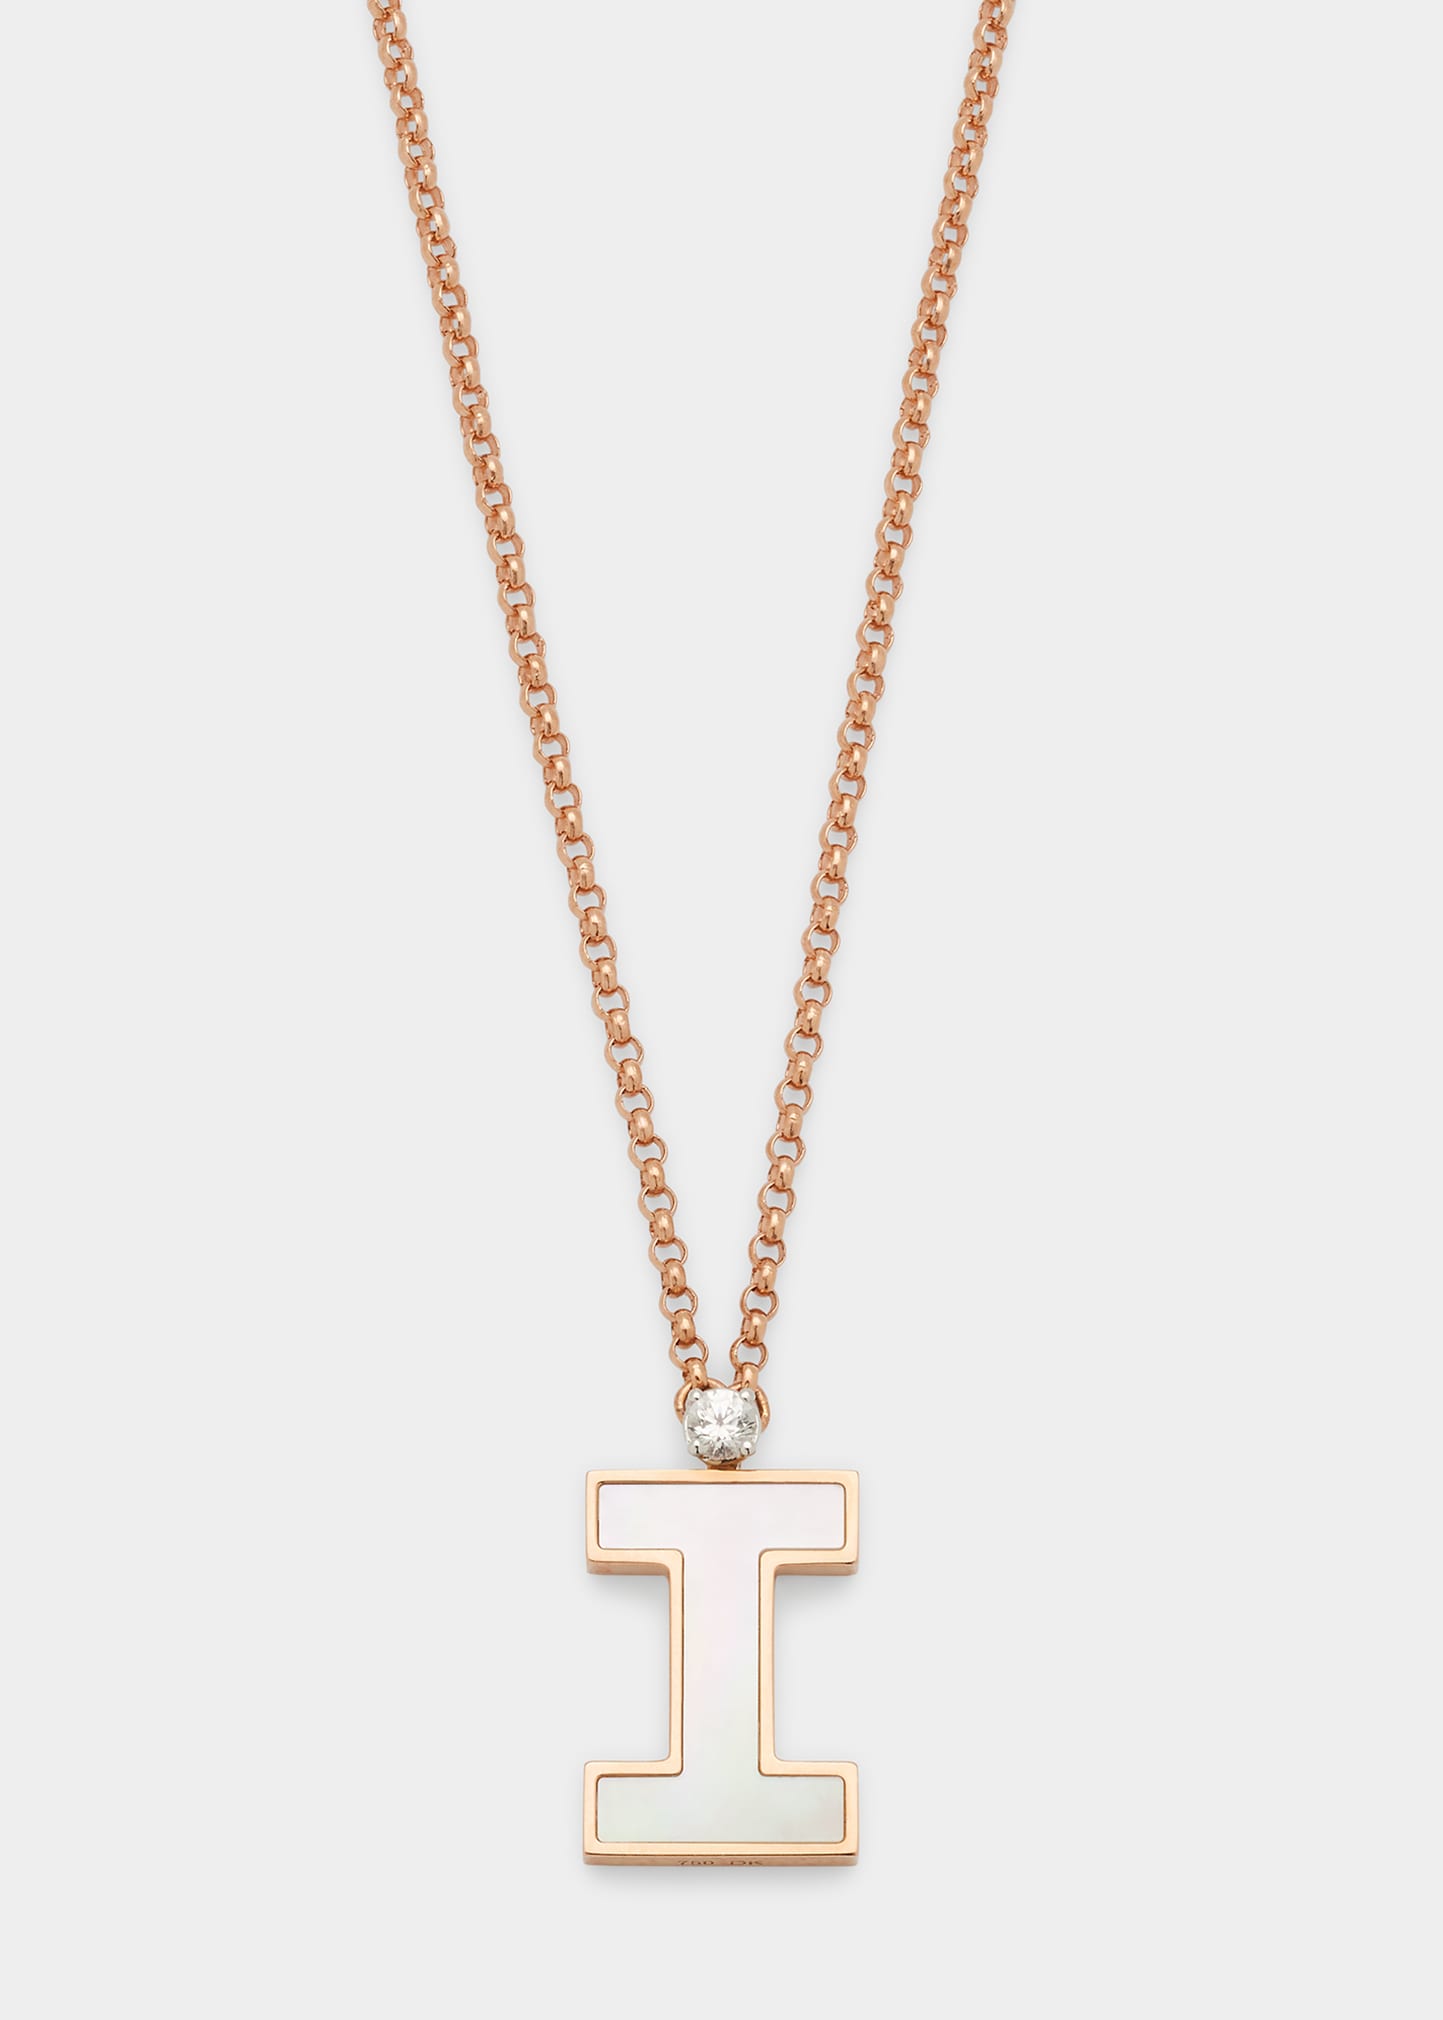 Rose Gold 'I' Letter Charm Necklace with Mother-of-Pearl and White Sapphire